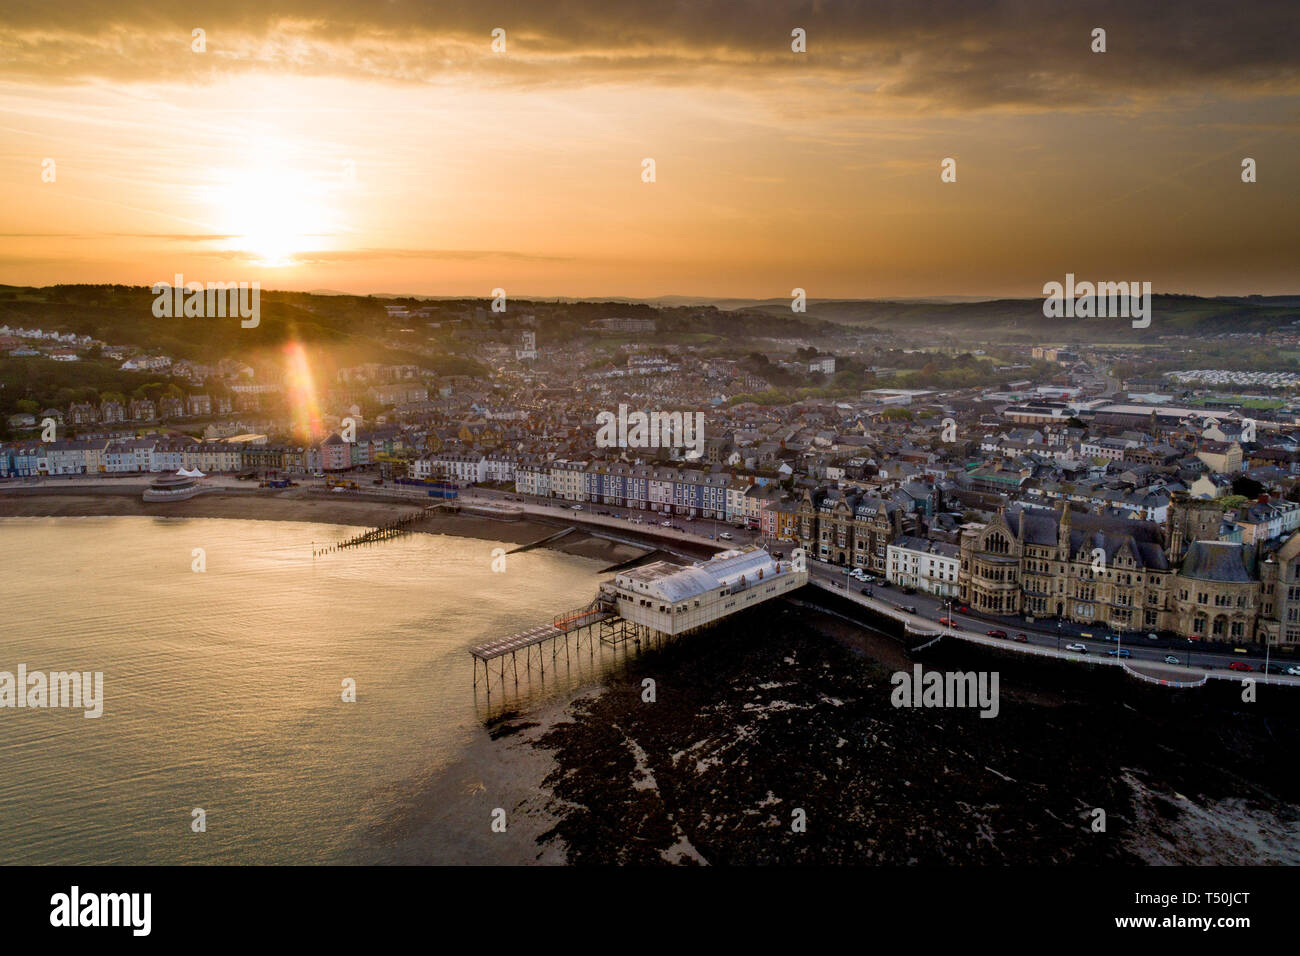 Aberystwyth Wales UK, Easter Saturday, 20 April 2019. UK Weather: Daybreak over the seaside and university town of Aberystwyth on the west wales coast, at the start of Easter Saturday 2019. The weather is again set to be hot and sunny, with temperatures in the low 20's Celsius (low 70's Fahrenheit). Credit: keith morris/Alamy Live News Stock Photo